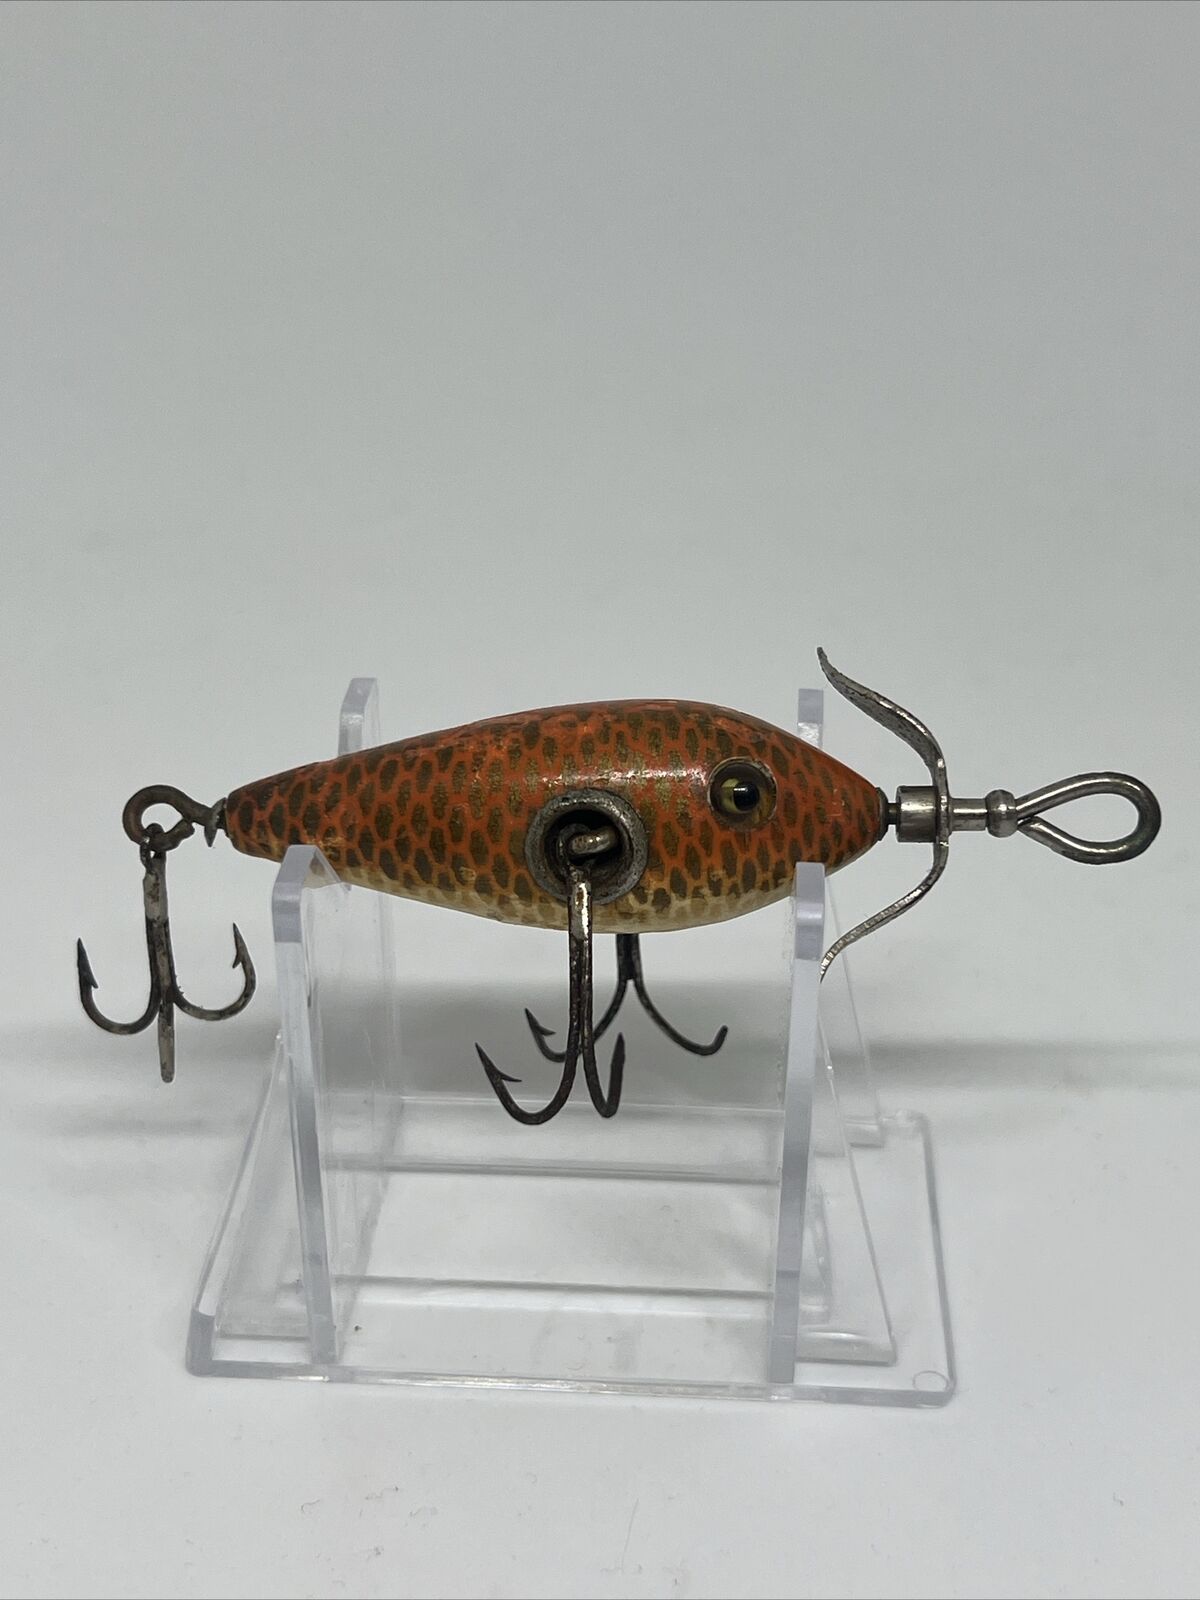 Early Heddon 20 Underwater Minnow Crackle Back Fishing Lure & Original Box